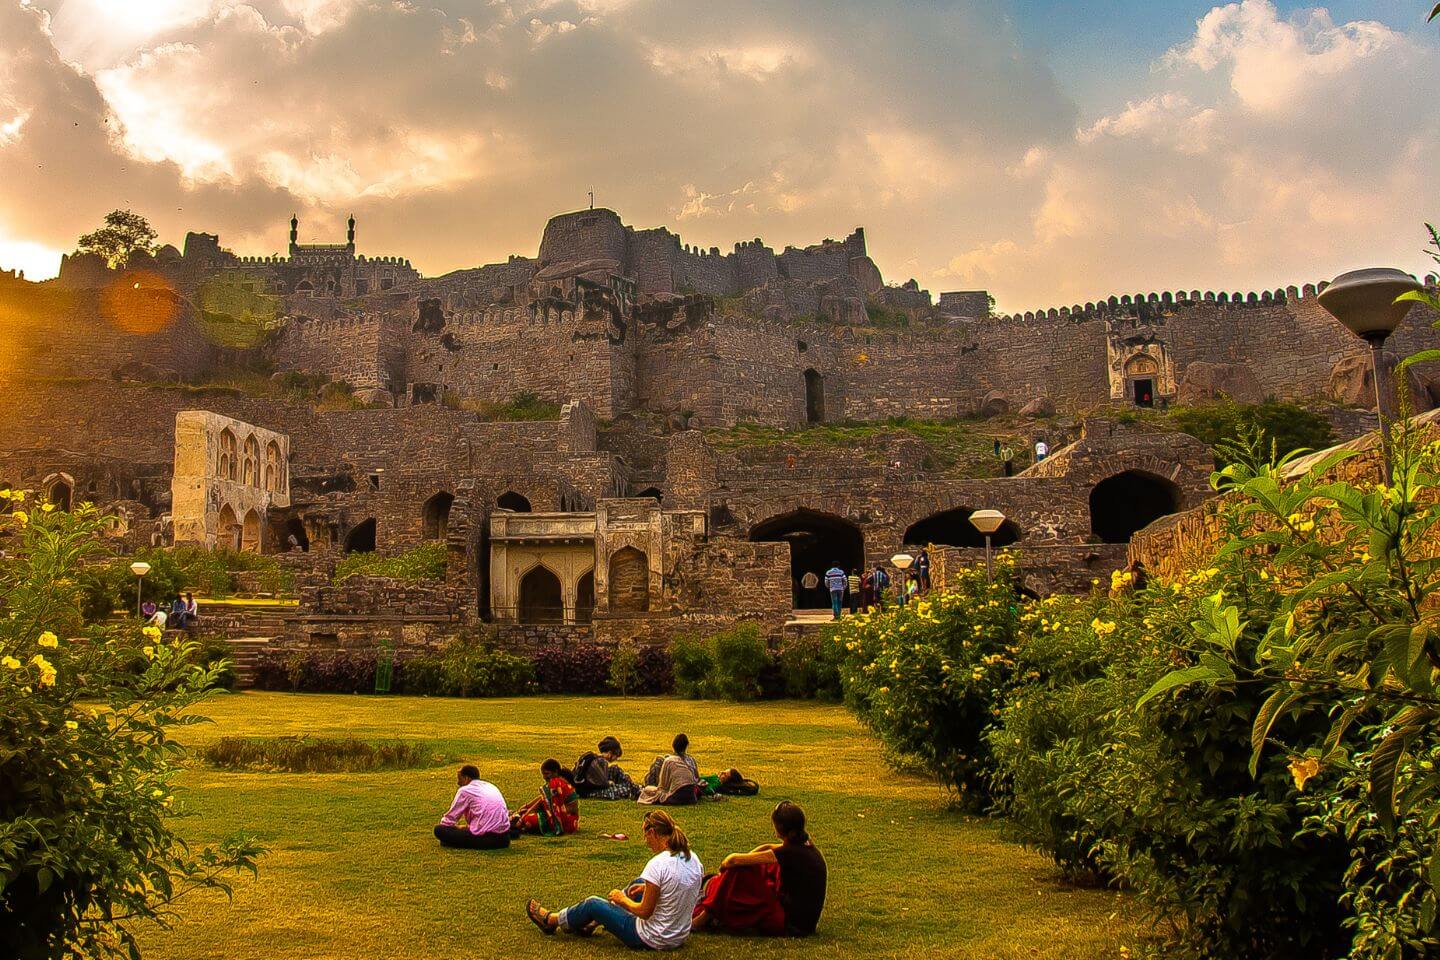 Golconda Fort (Hyderabad Tourism) Timings, Ticket Price, History